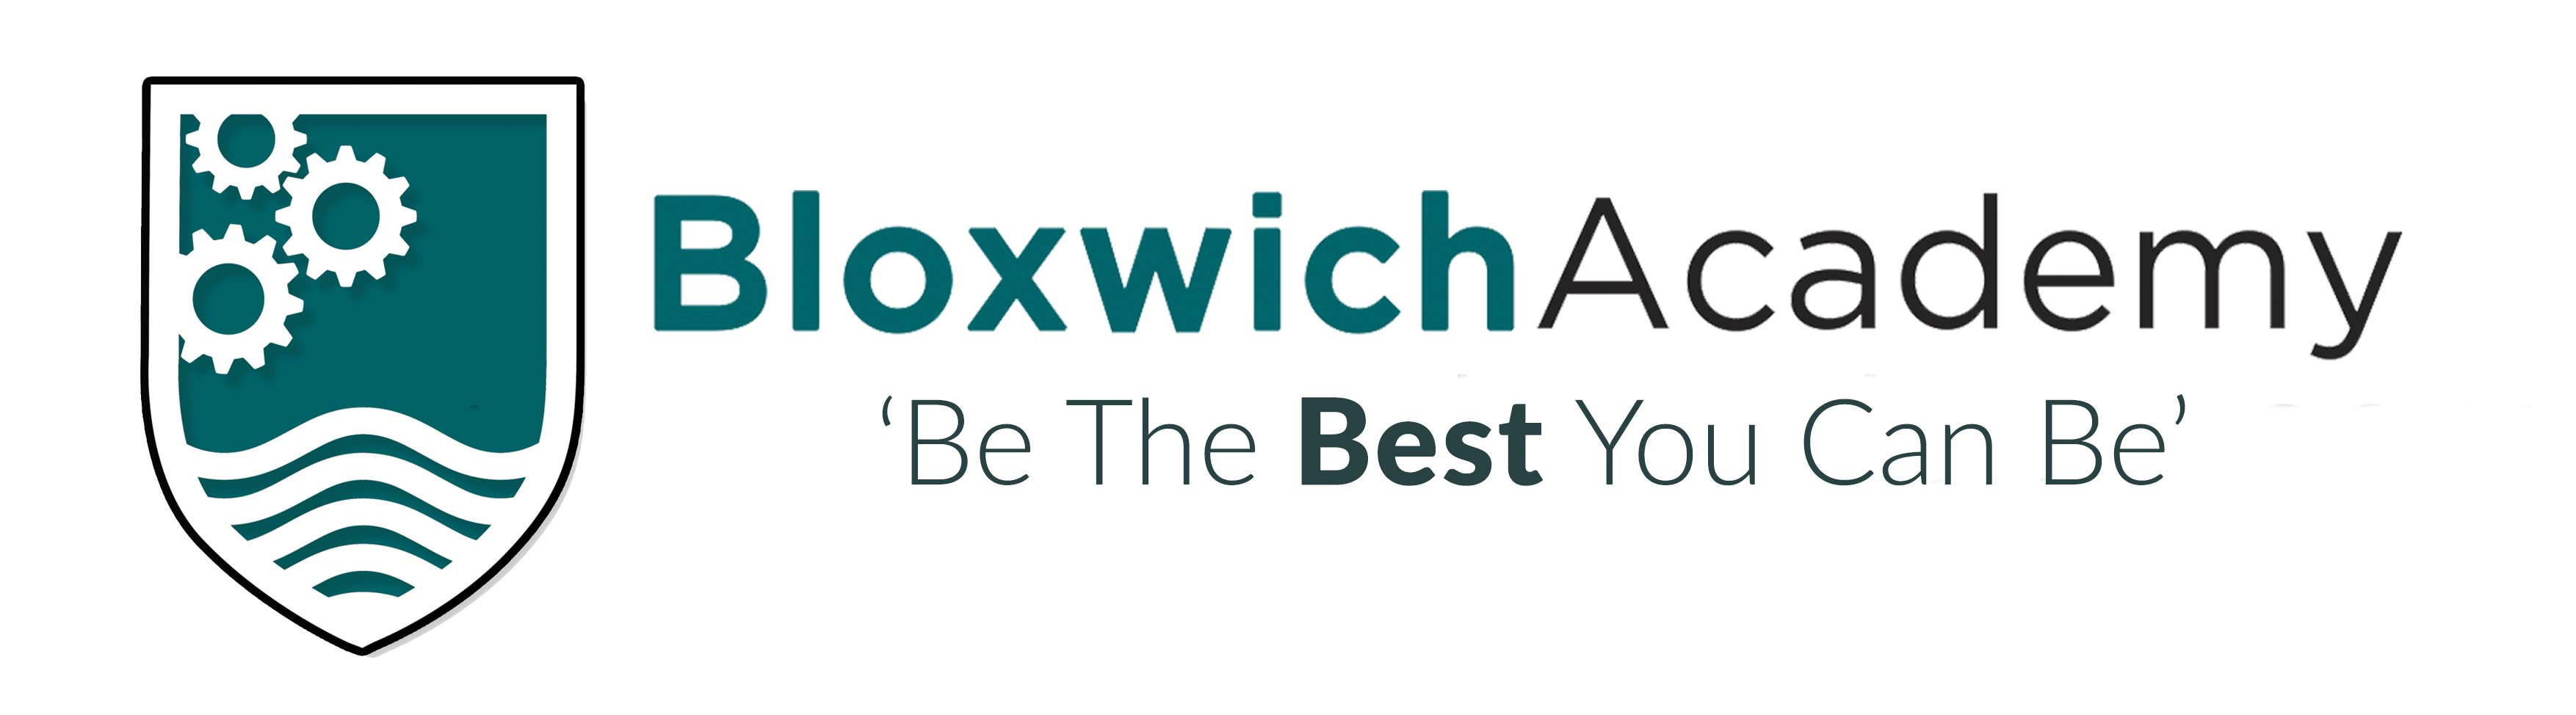 Bloxwich Academy Be The Best You Can Be